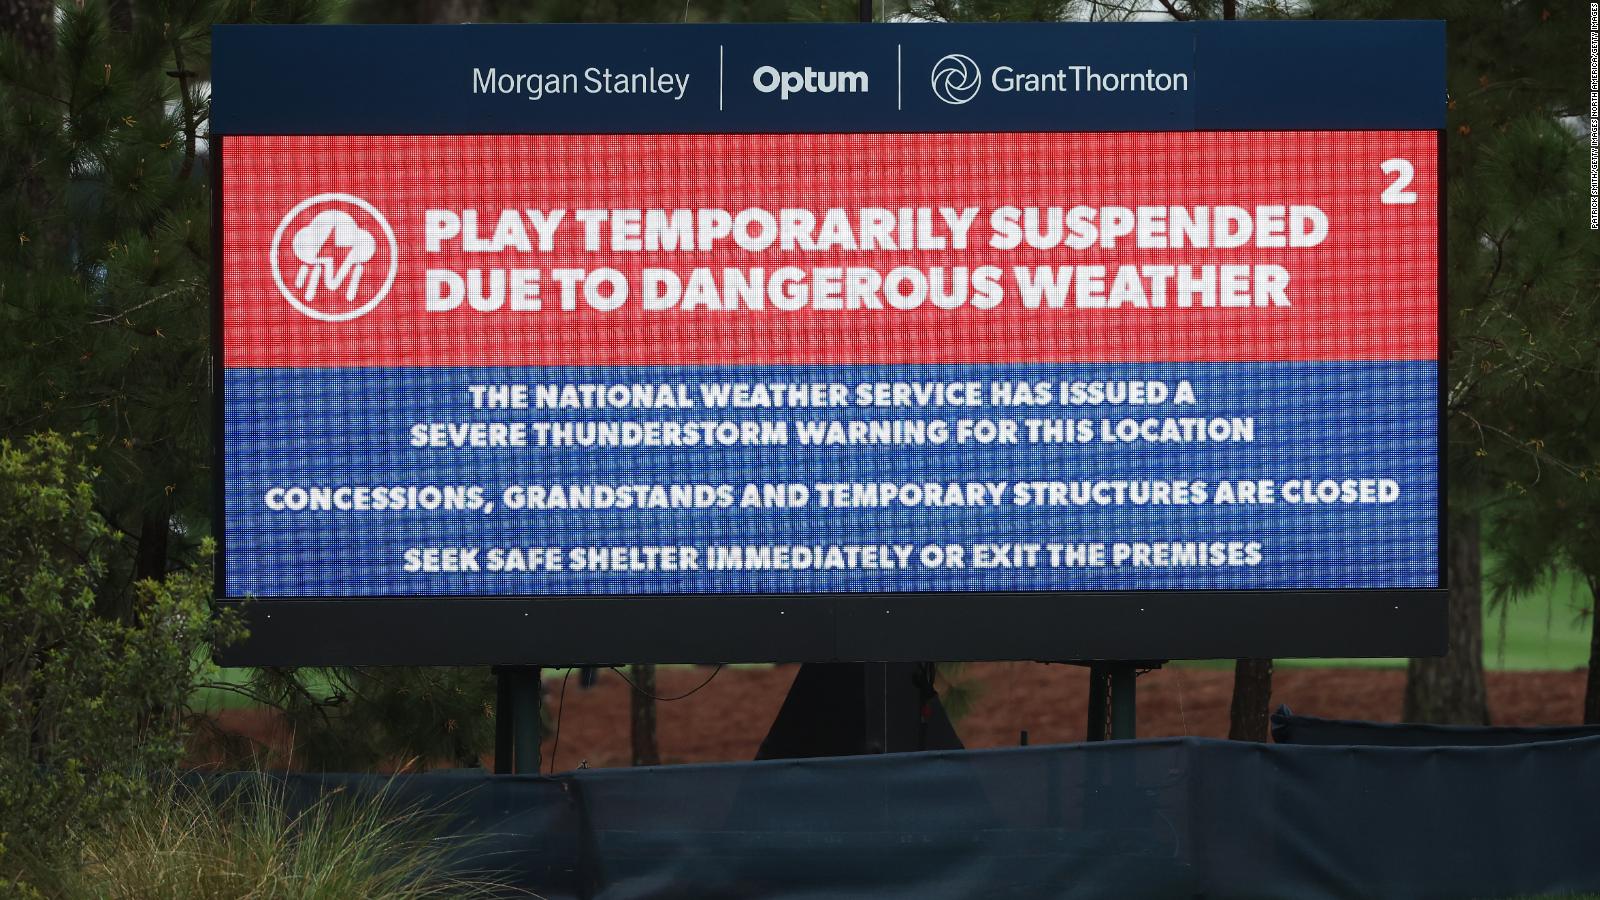 Tommy Fleetwood, Tom Hoge share early lead at weatherdisrupted Players